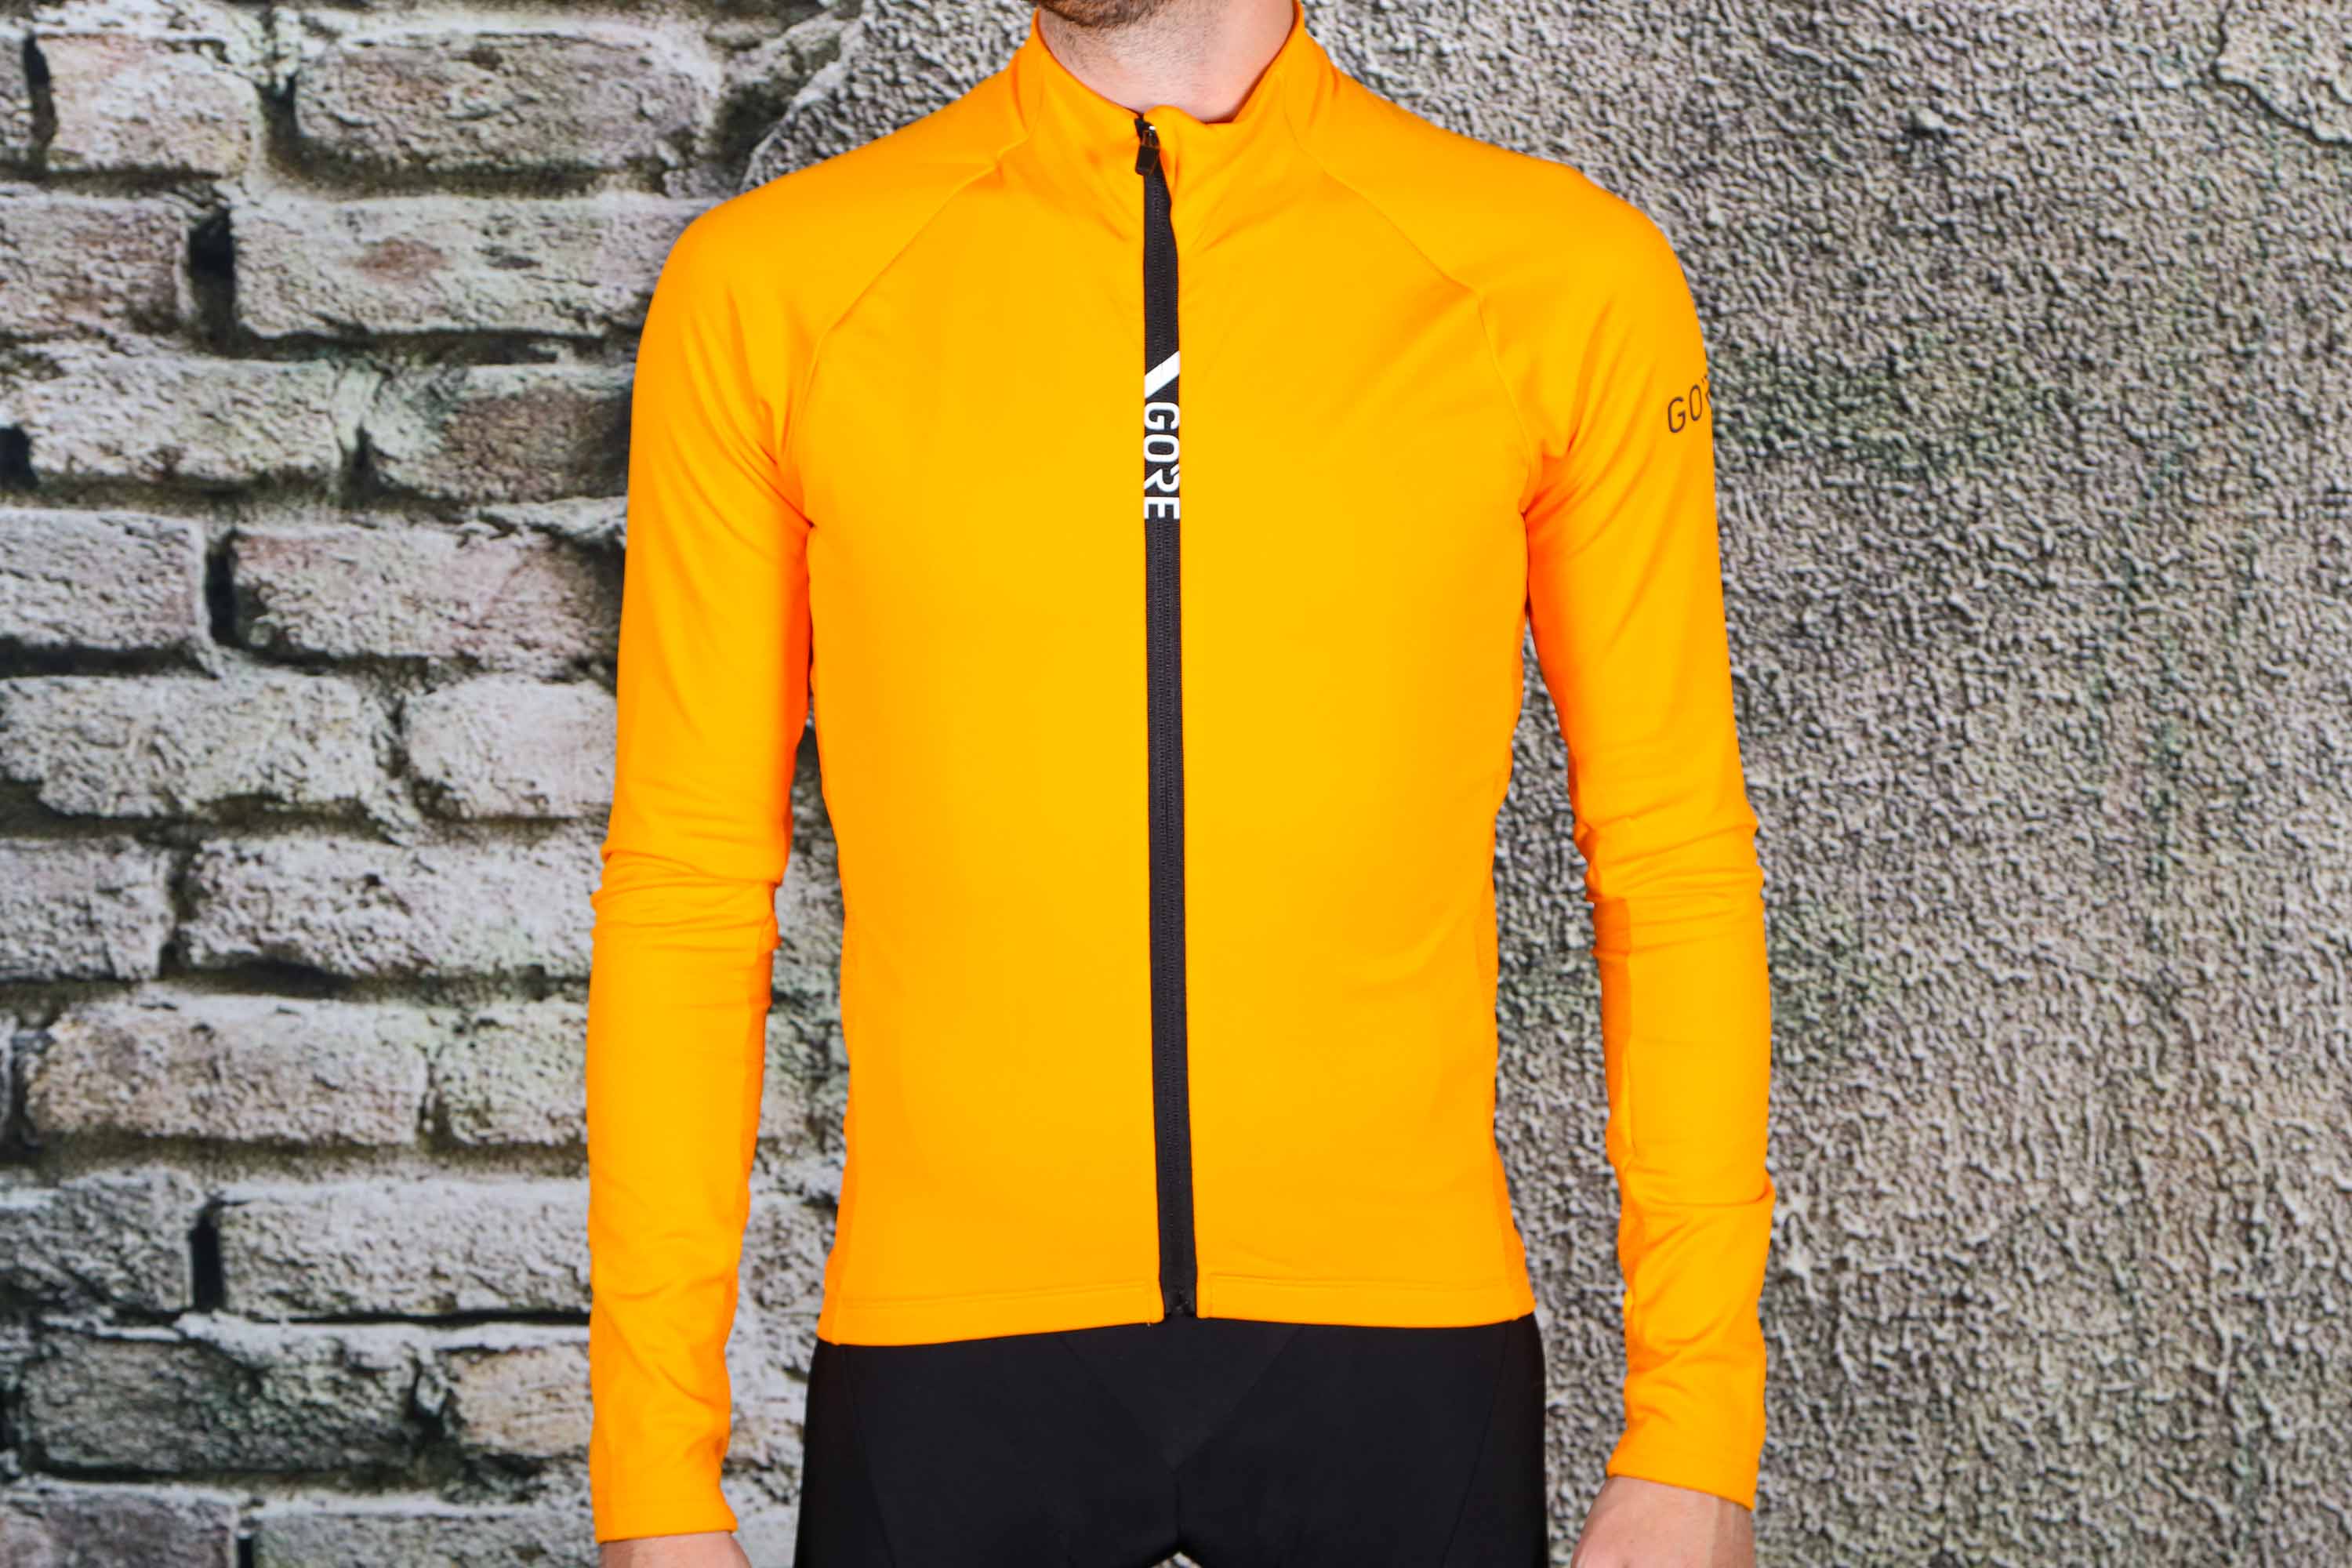 gore thermo jersey